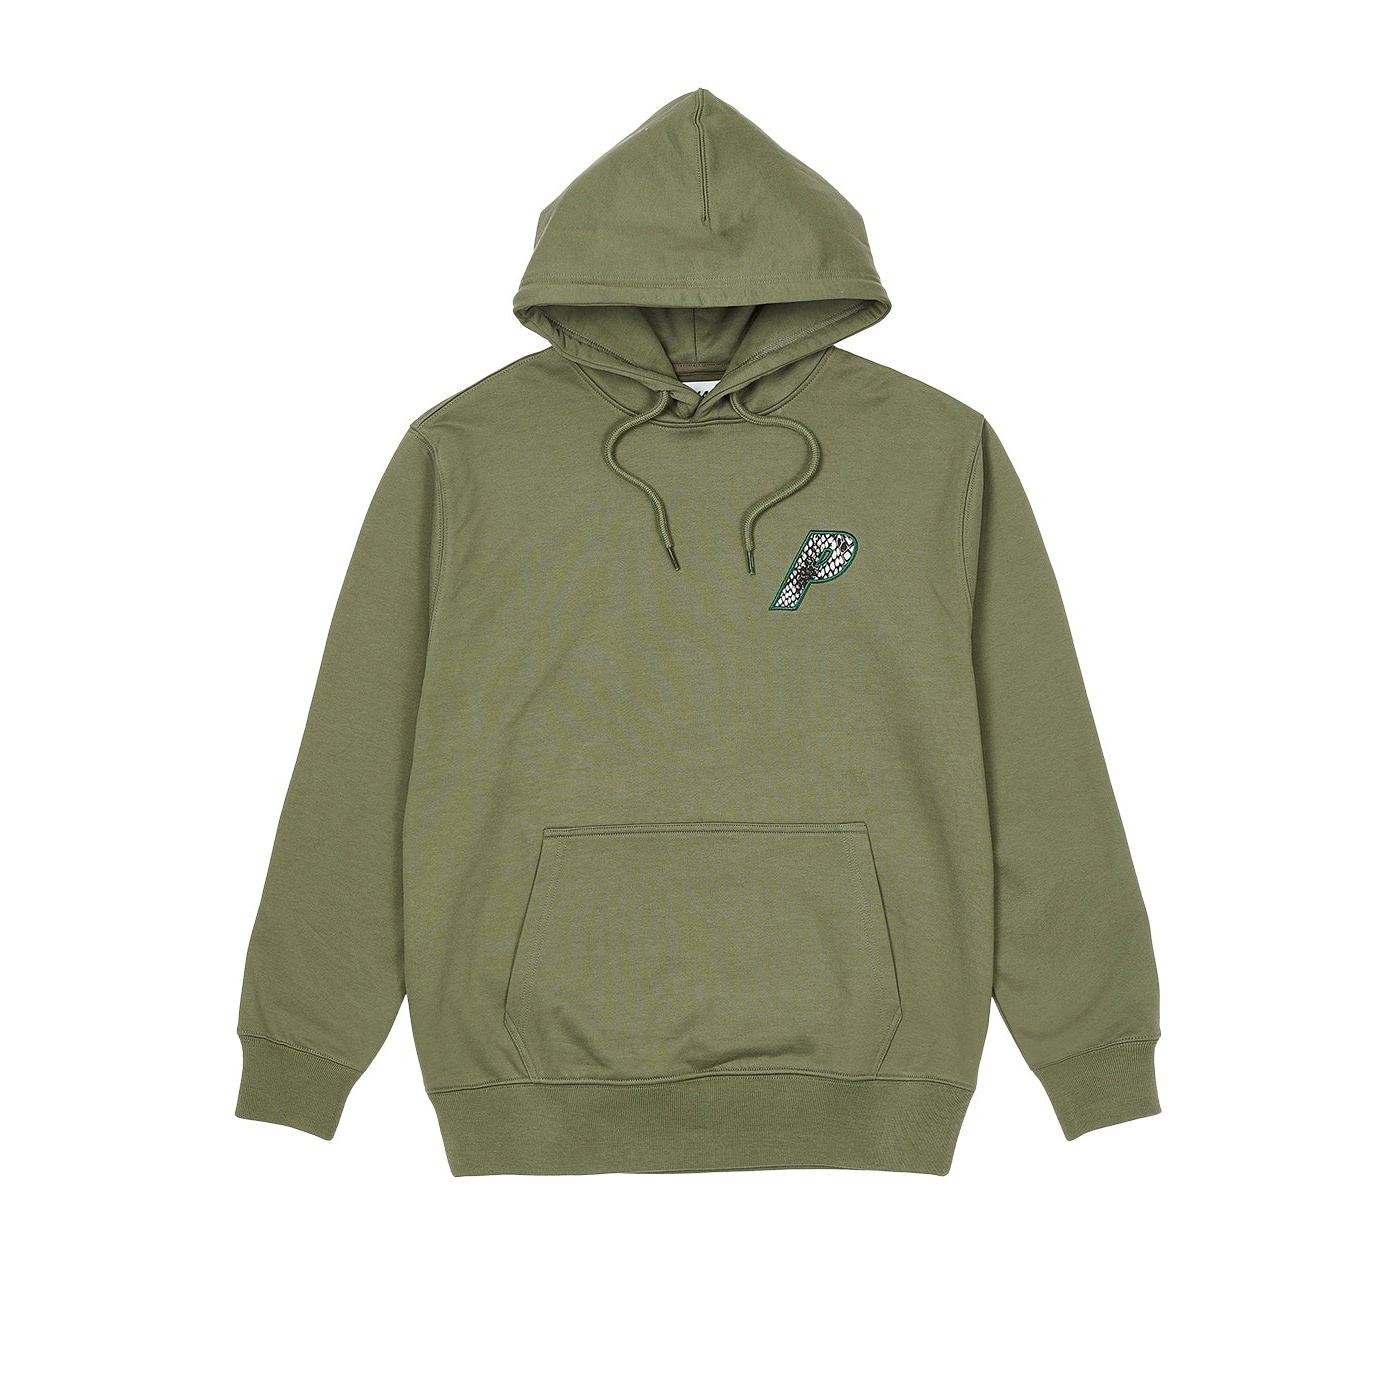 Thumbnail P-3 SNAKE APPLIQUE HOOD OLIVE one color